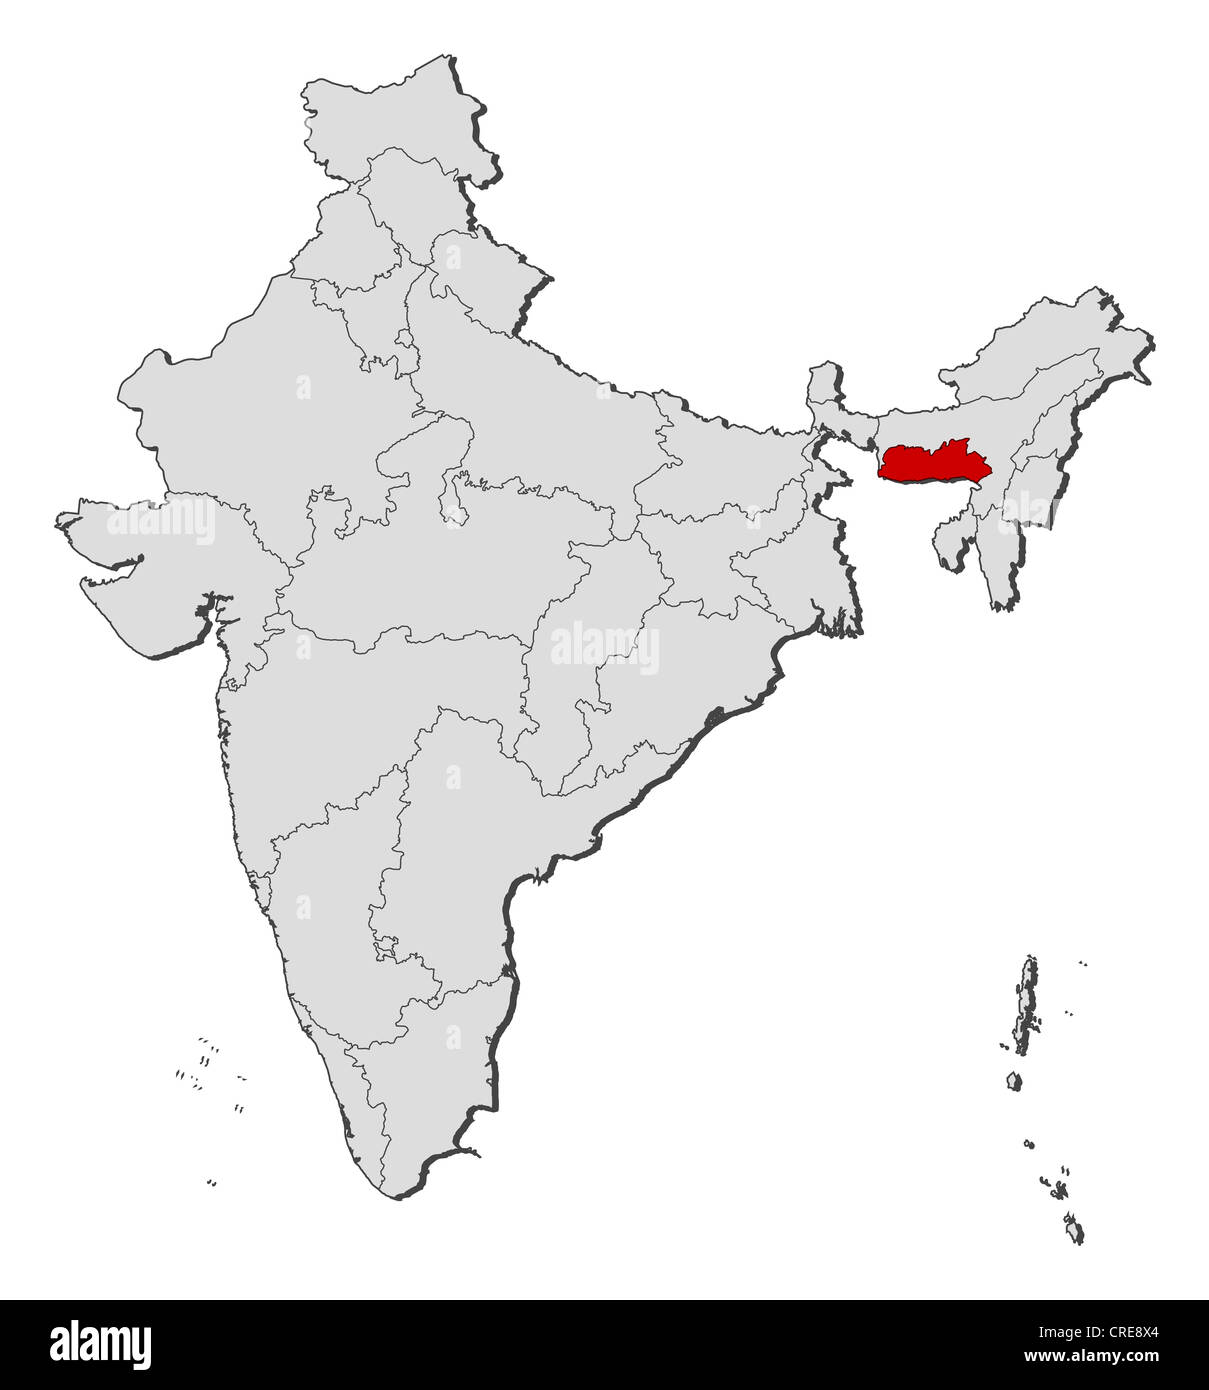 Political Map Of India With The Several States Where Meghalaya Is